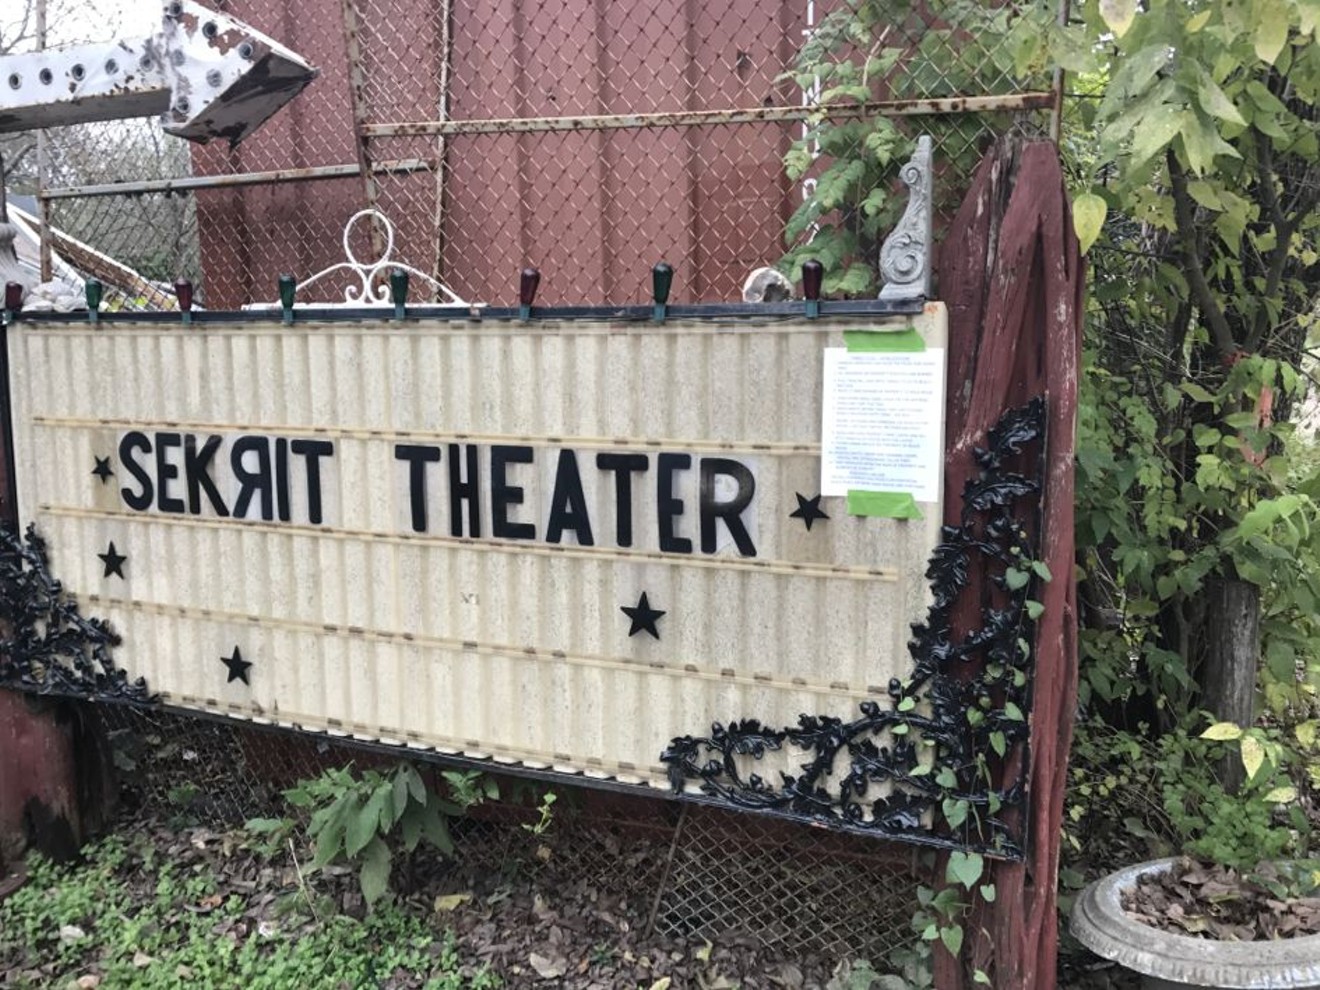 Sekrit Theater feels like a part of the "Old Austin" that is rapidly disappearing